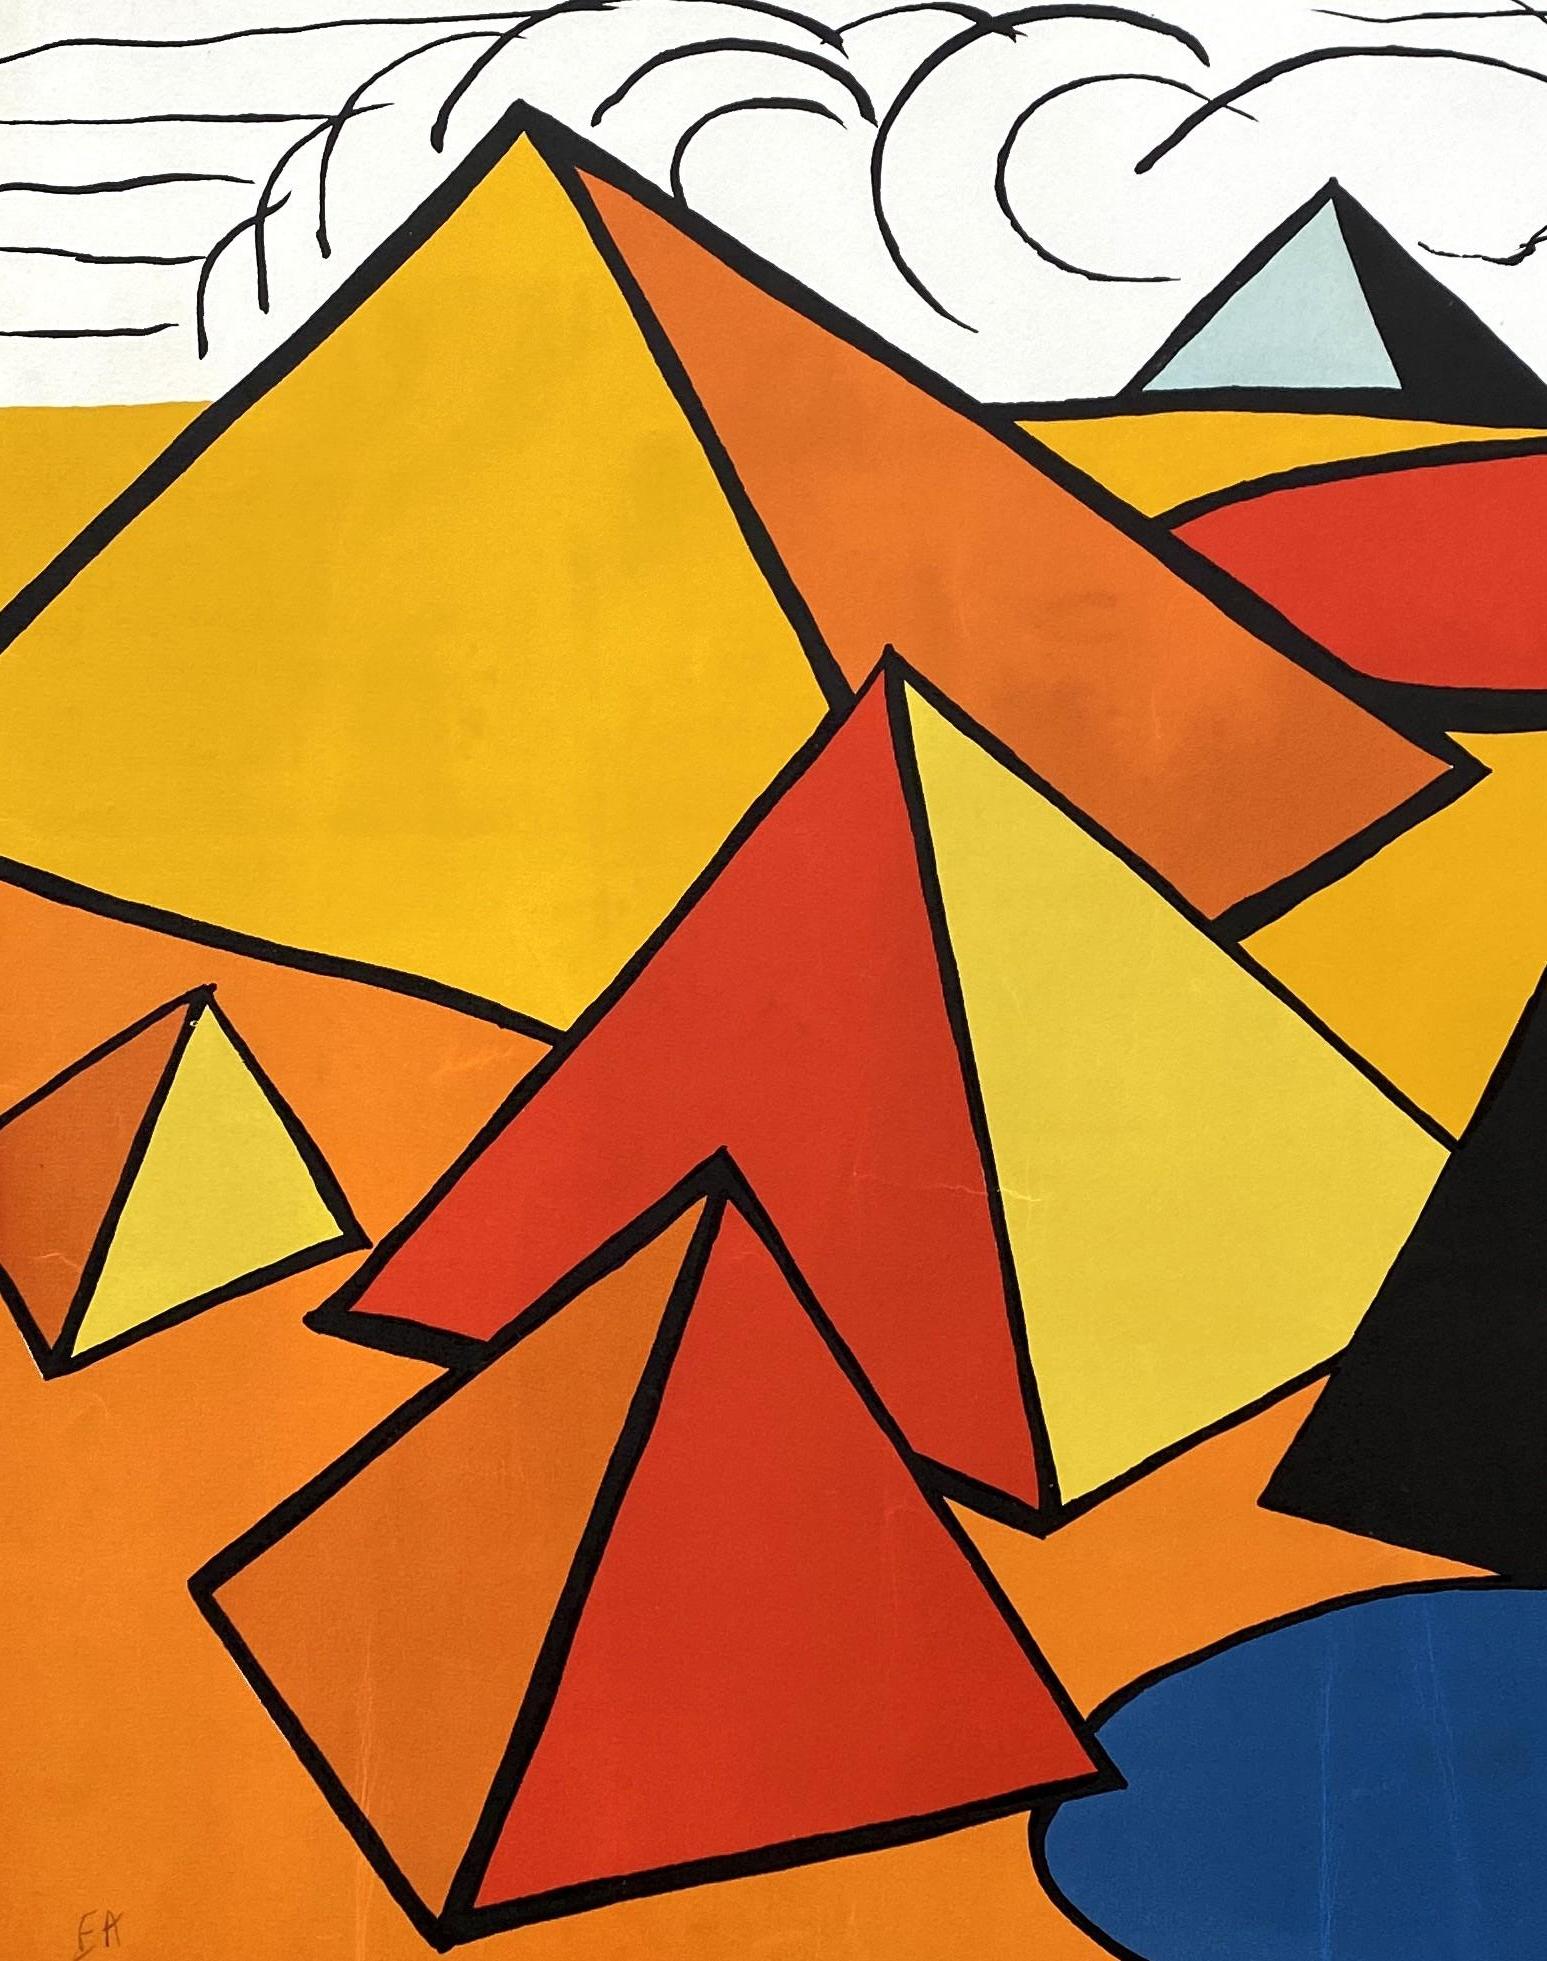 Alexander CALDER
Egypt, Multicolored Pyramids

Original lithograph, c. 1970
Hand signed in pencil
Annotated EA (epreuve d'artiste / artist proof)
On vellum size 75 x 110 cm (c. 29 x 43 in)
Fair condition (some fold and colors lightly darkened over